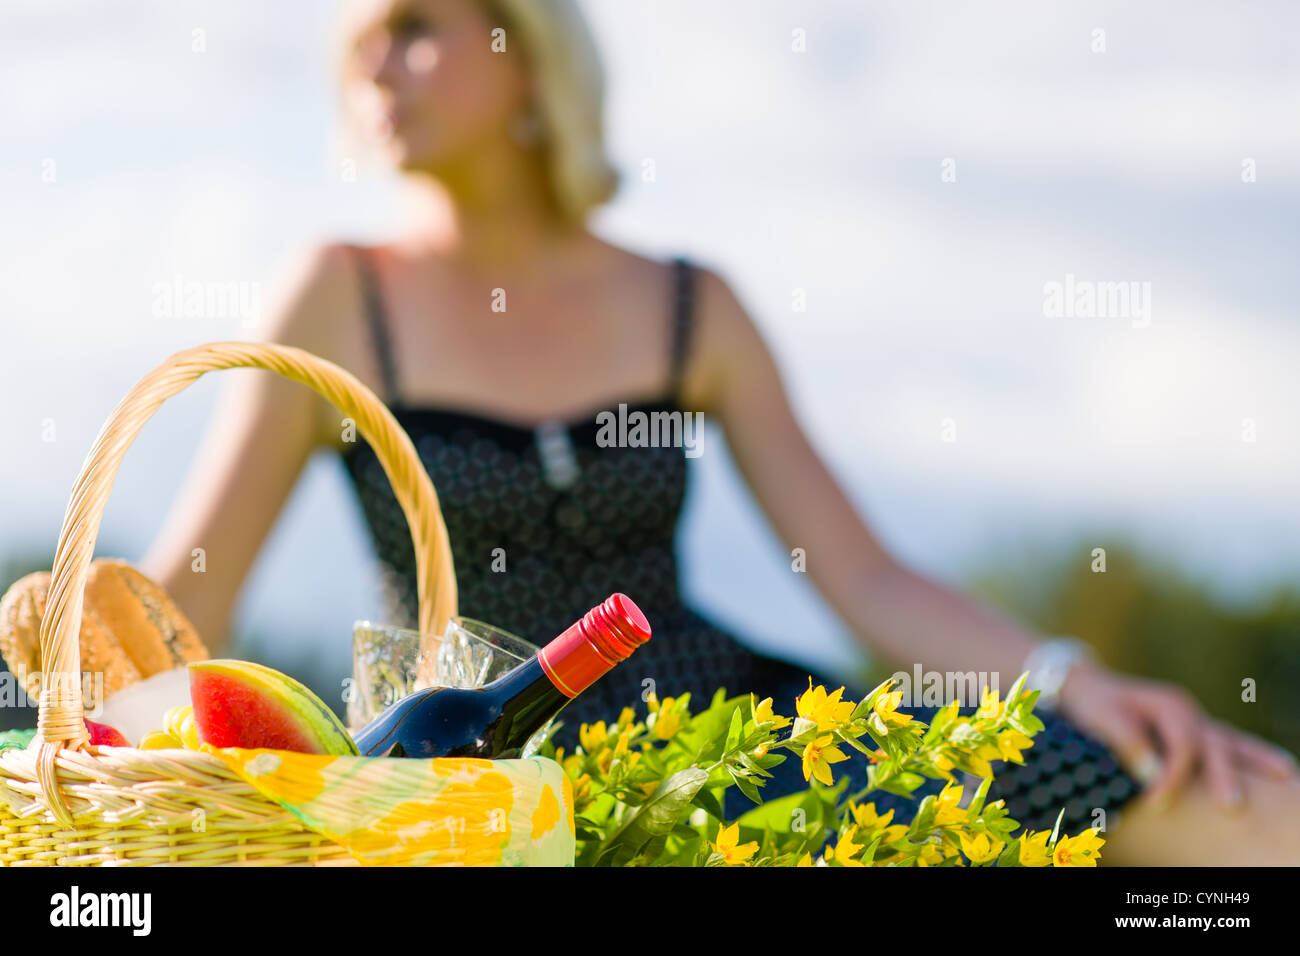 Picnic basket and woman out of the focus on background, horizon format Stock Photo